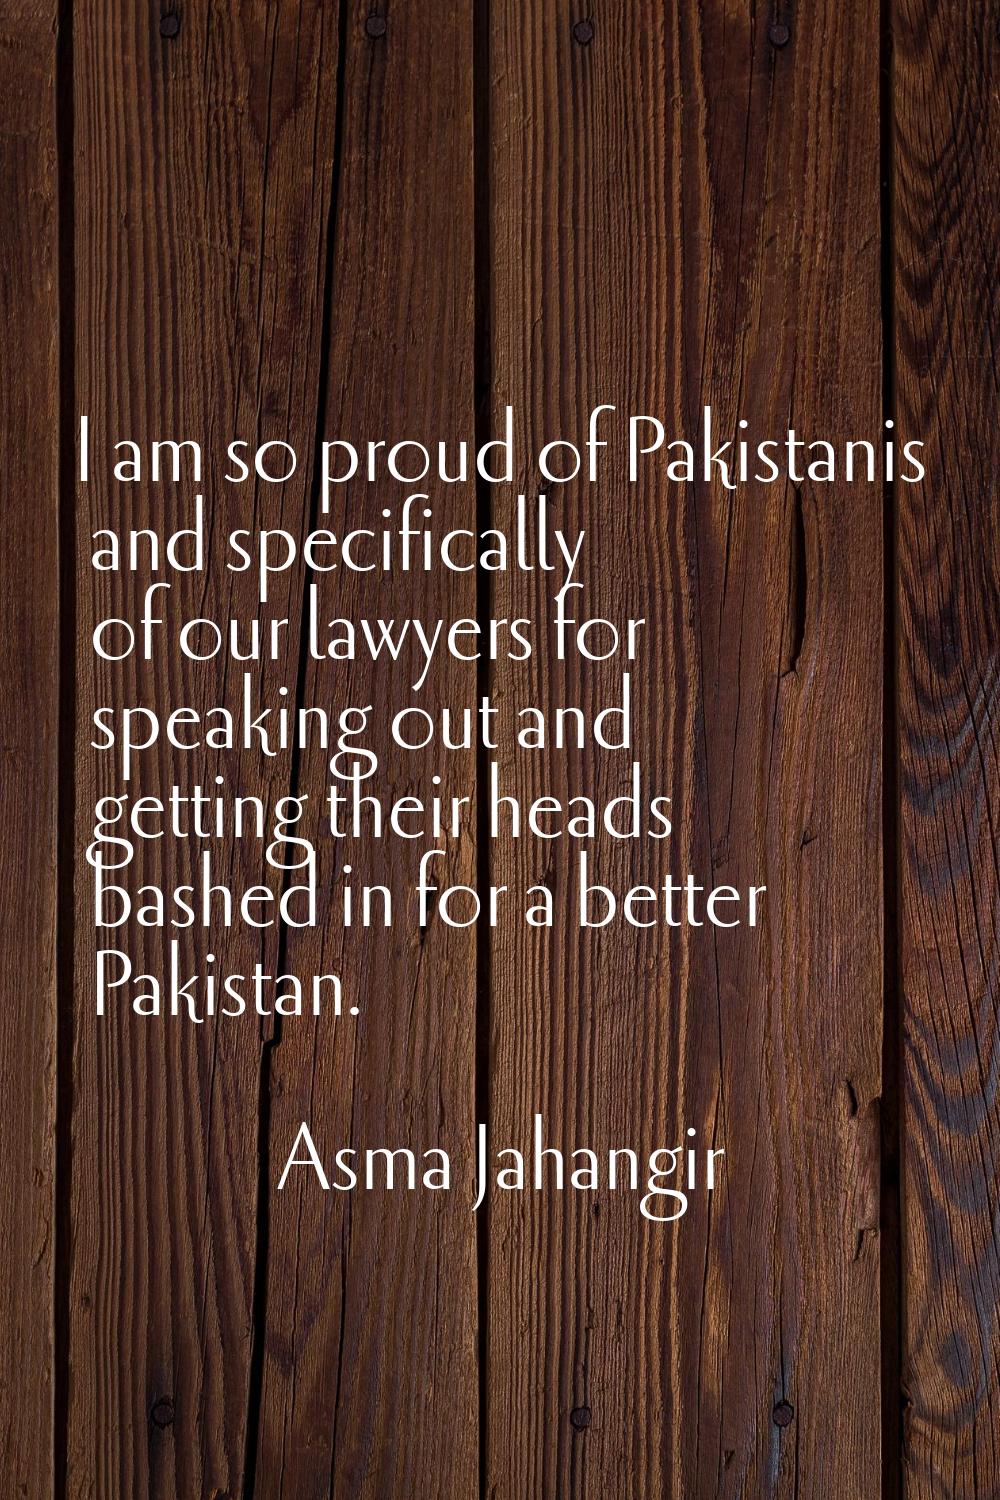 I am so proud of Pakistanis and specifically of our lawyers for speaking out and getting their head